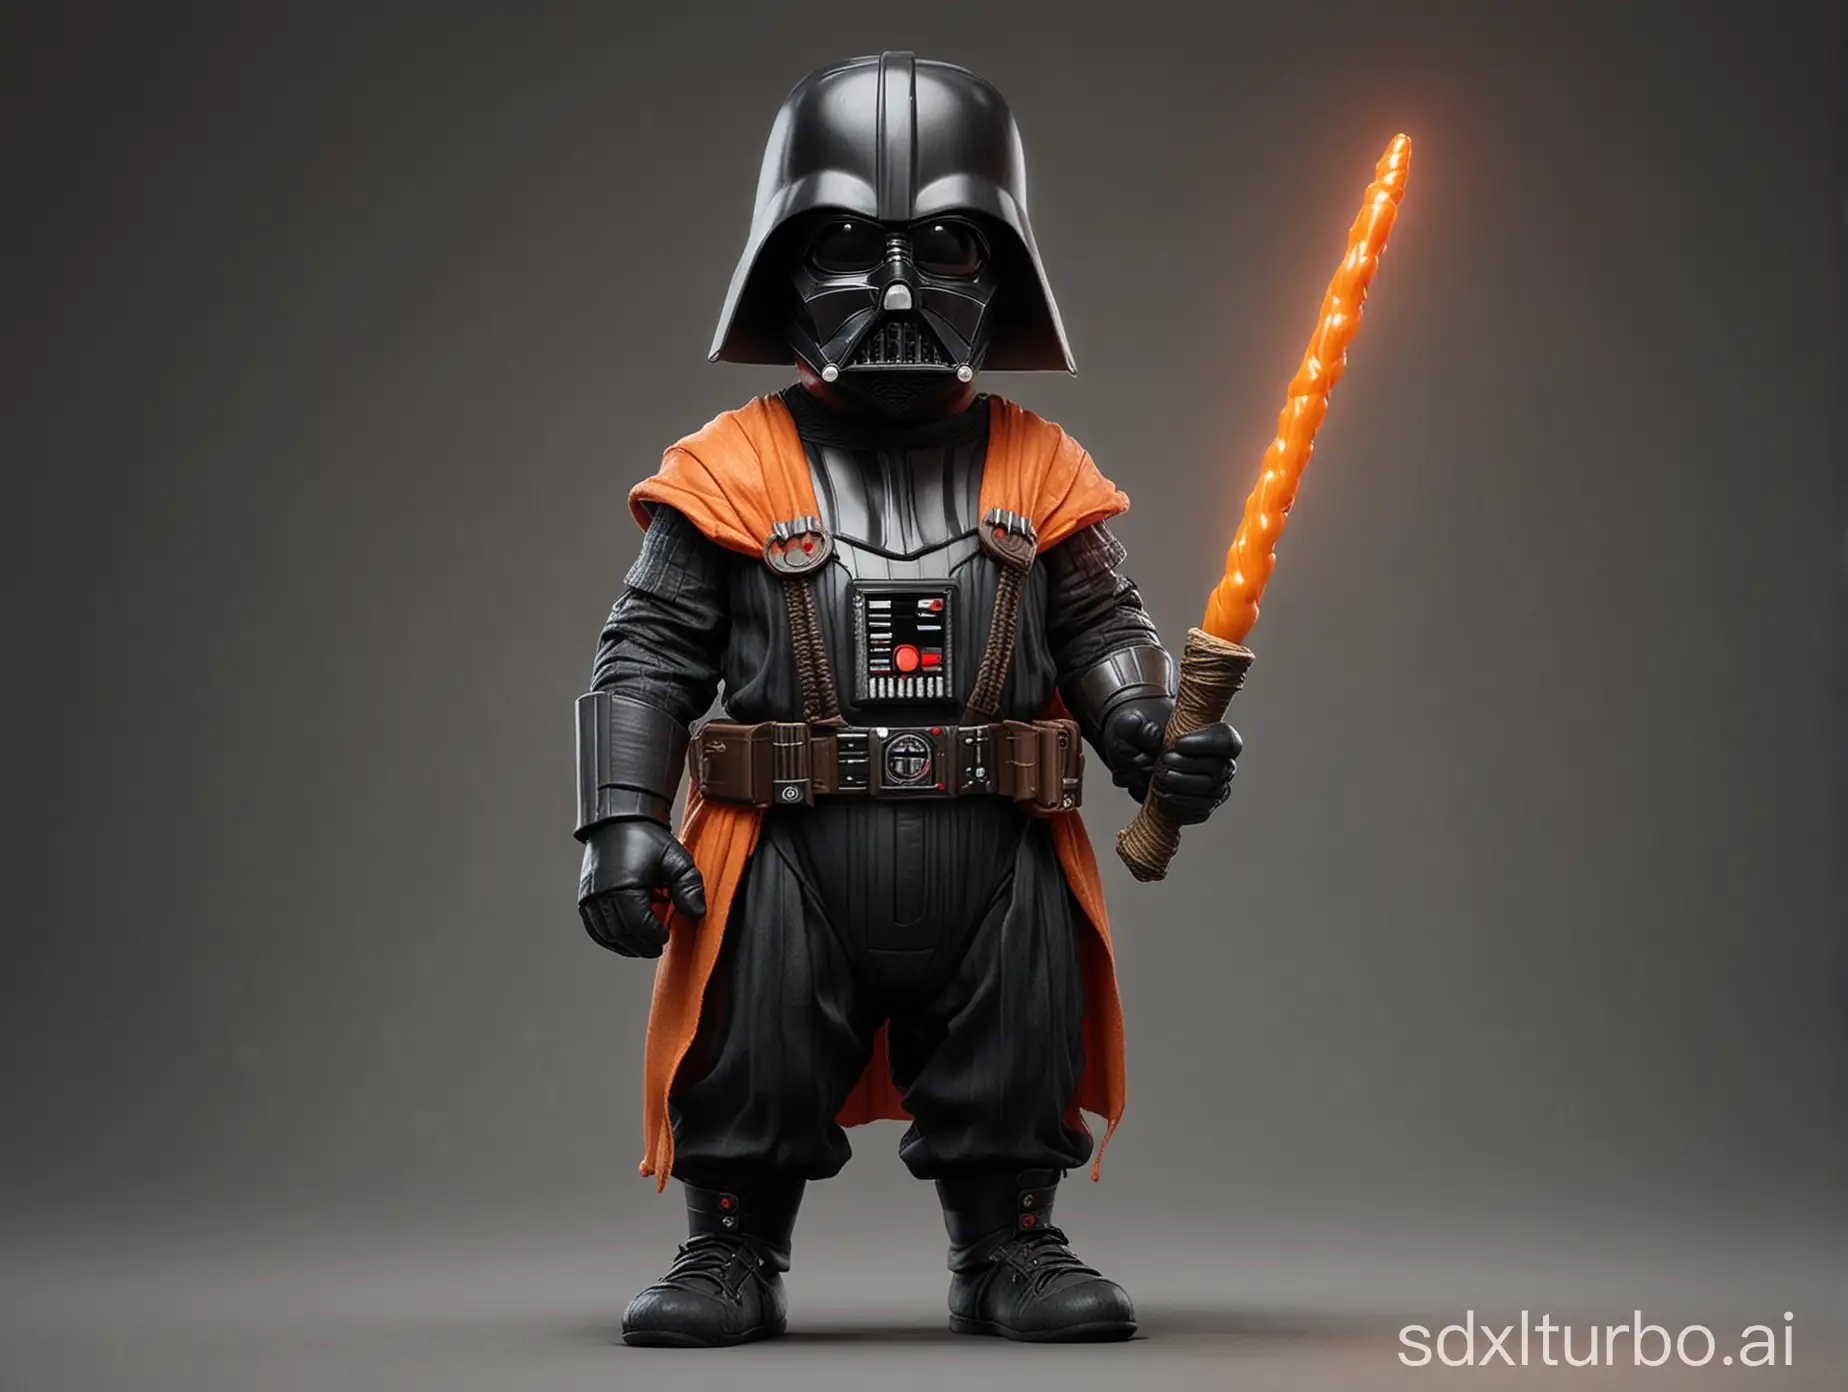 Dwarf-Darth-Vader-Wielding-Carrot-Lightsaber-in-Dungarees-and-Cap